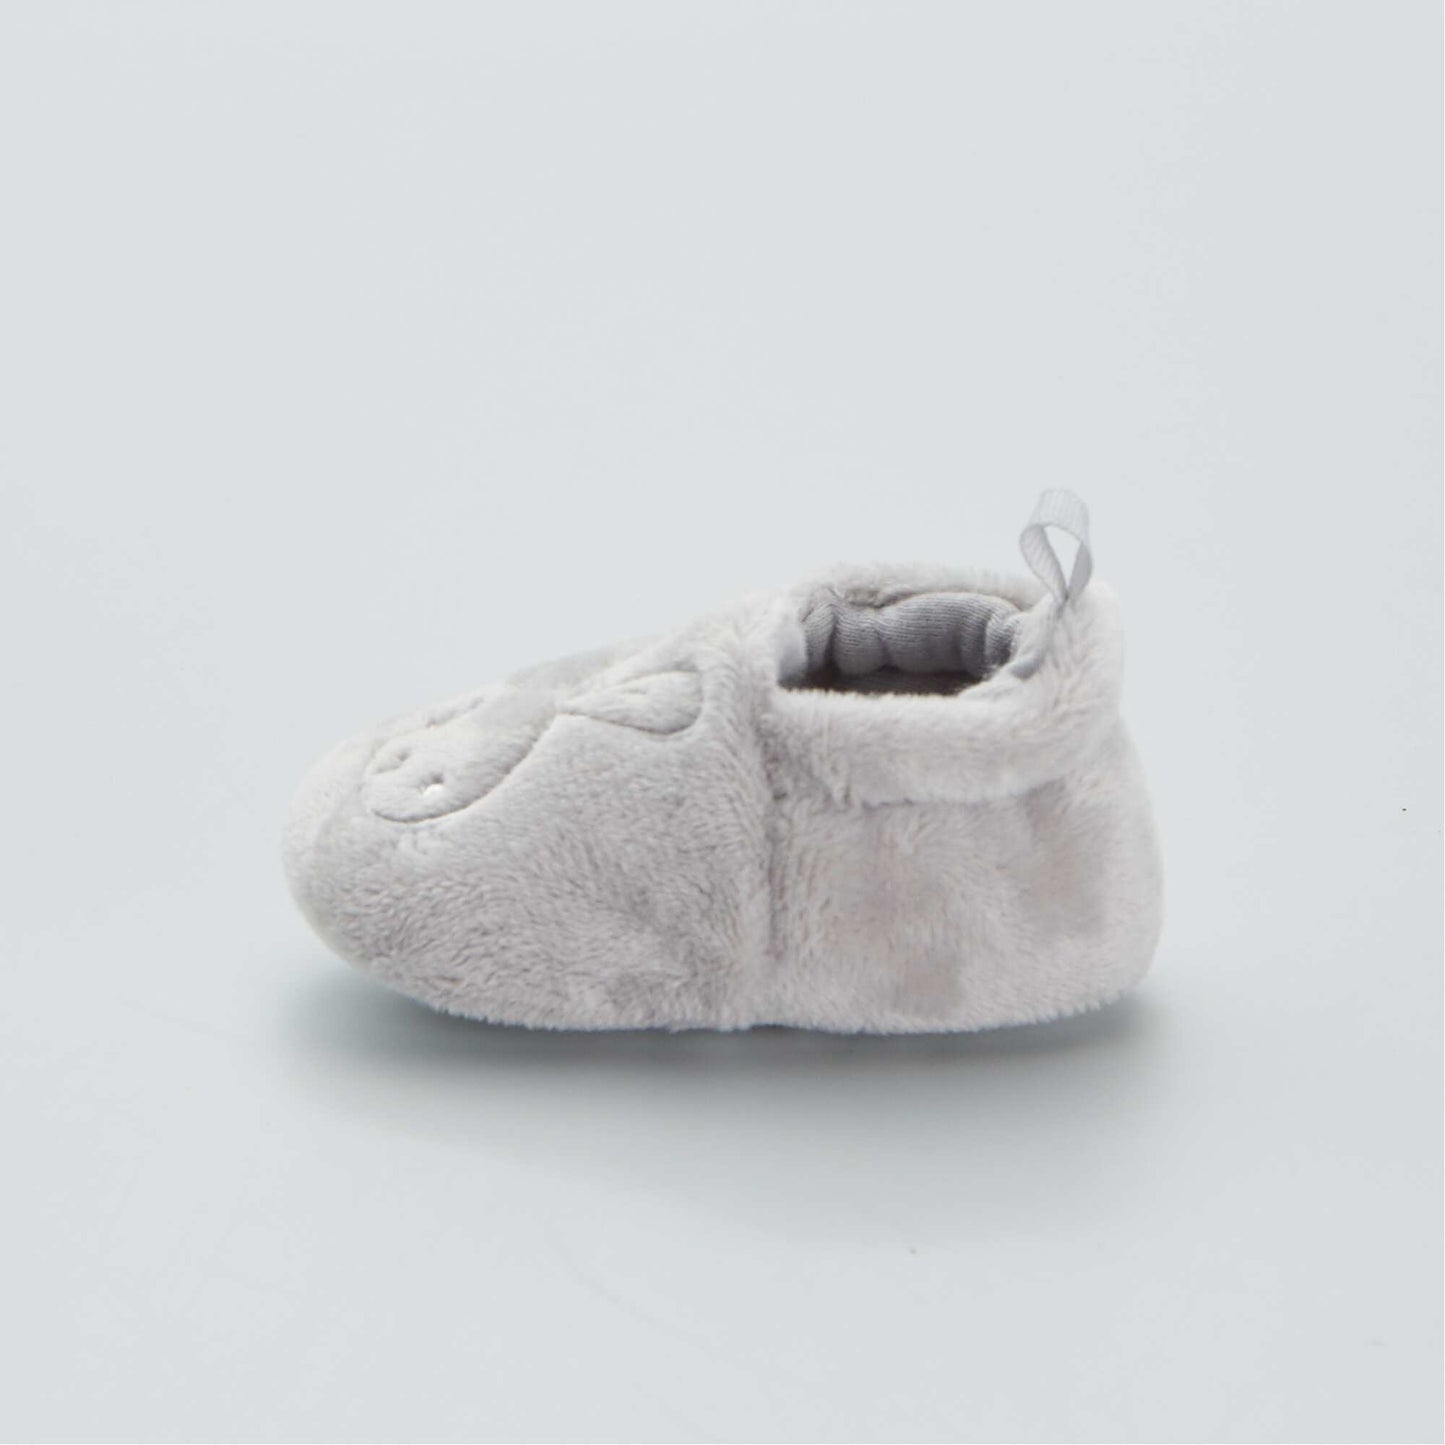 Embroidered baby booties - rabbit grey